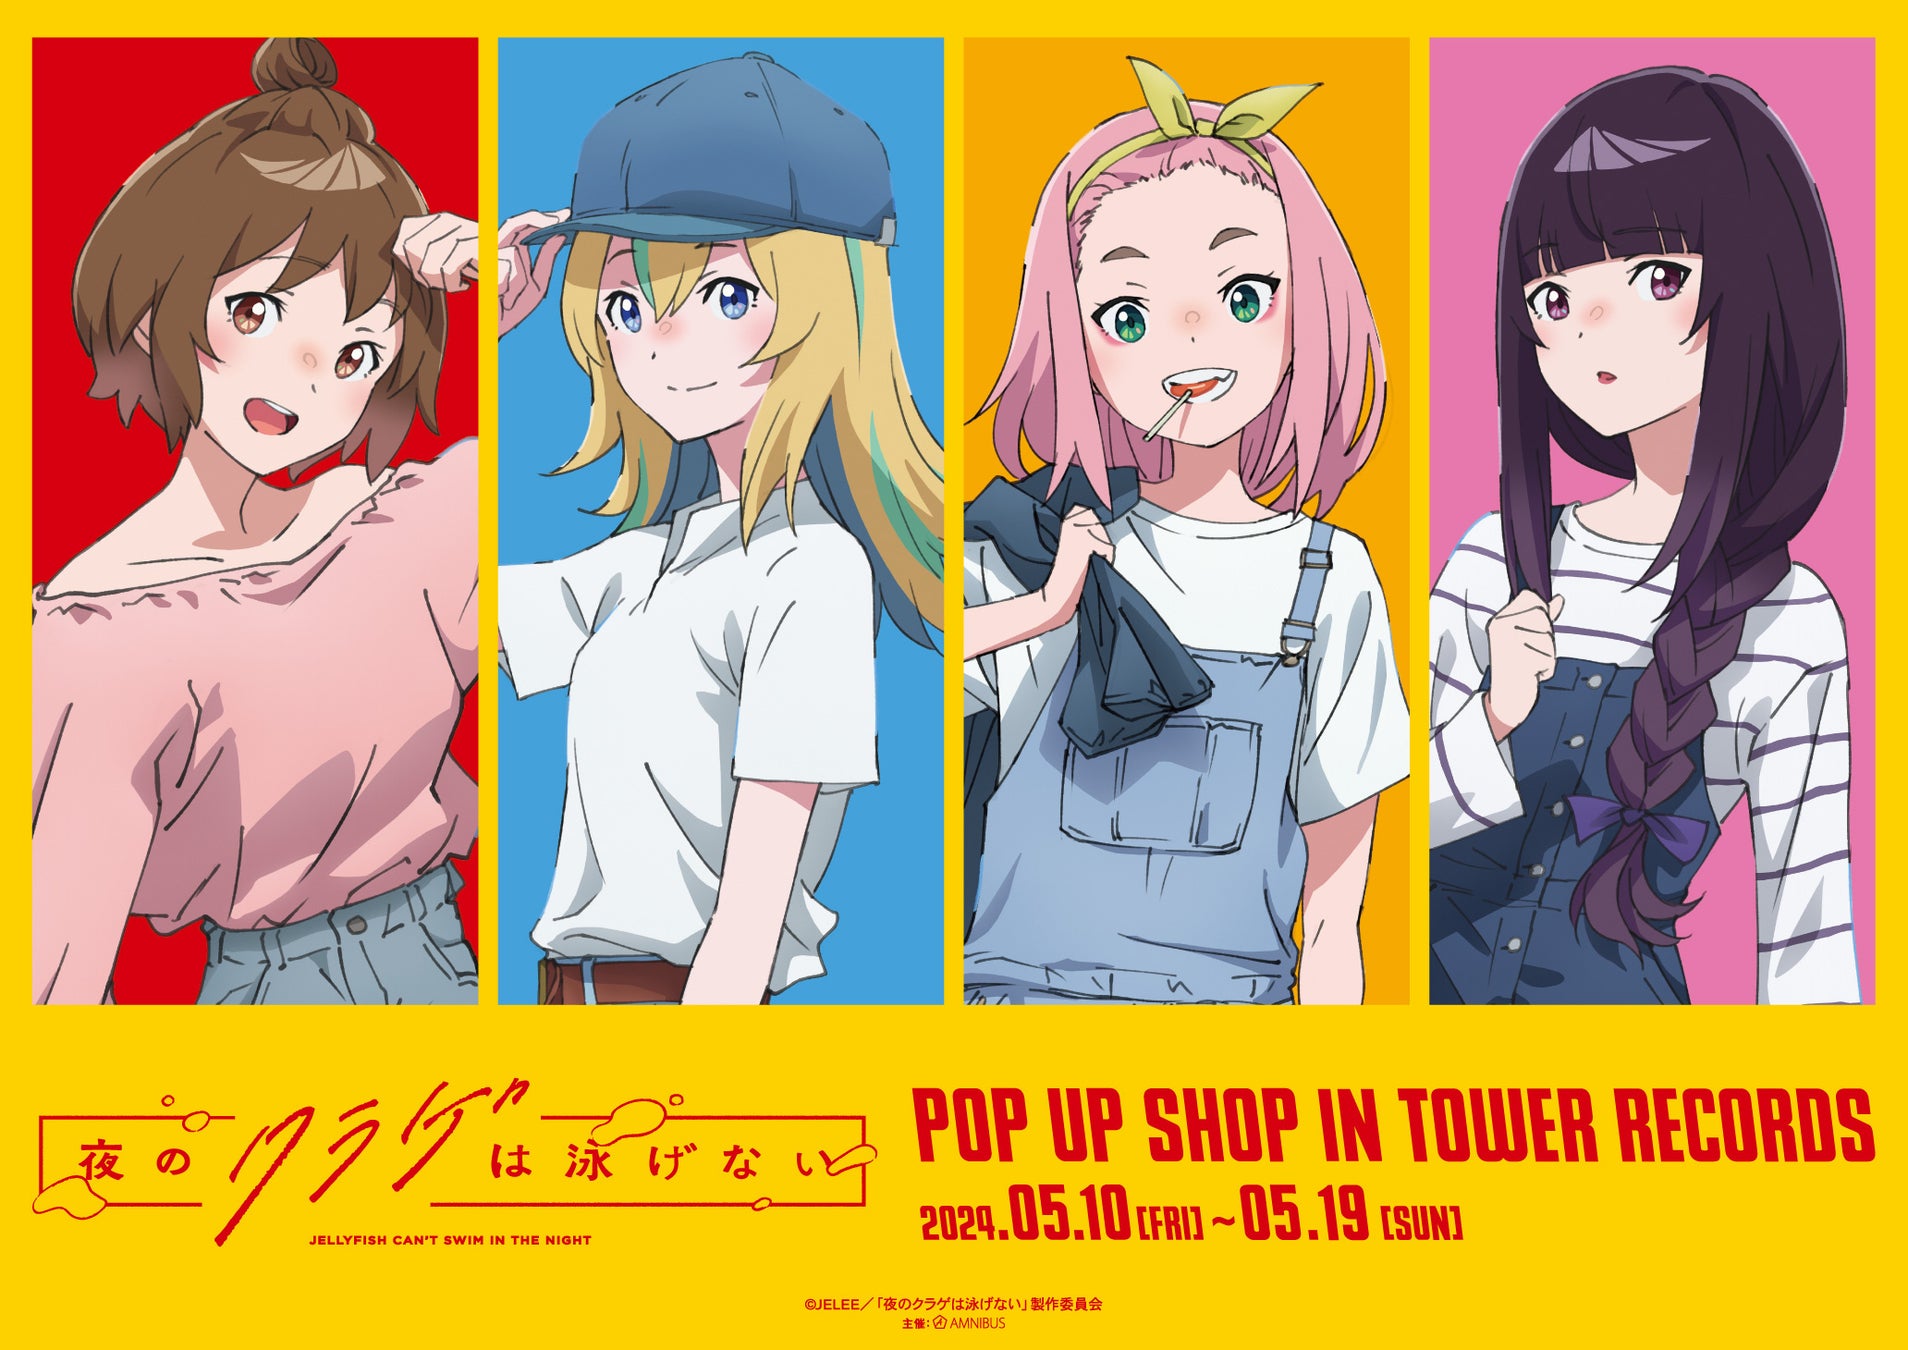 「TVアニメ『狼と香辛料 MERCHANT MEETS THE WISE WOLF』POP UP STORE in ロフト」の開催が決定！